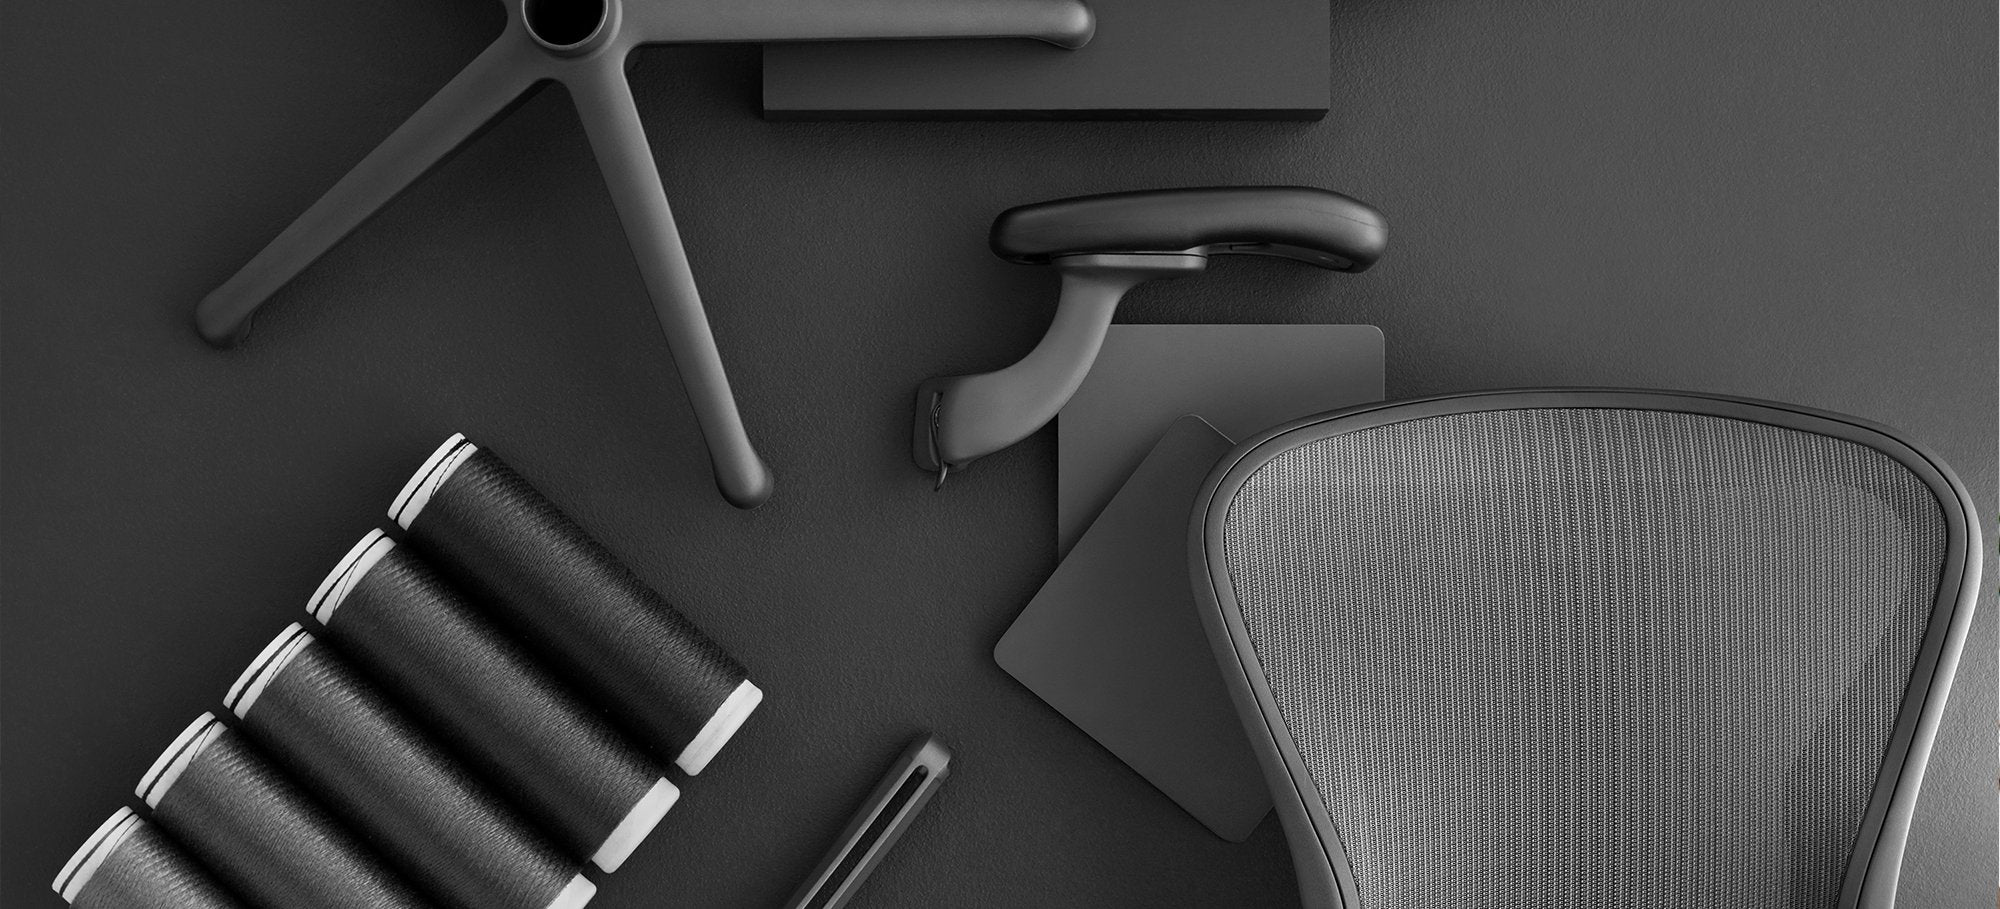 Detailed view of Aeron Chair components